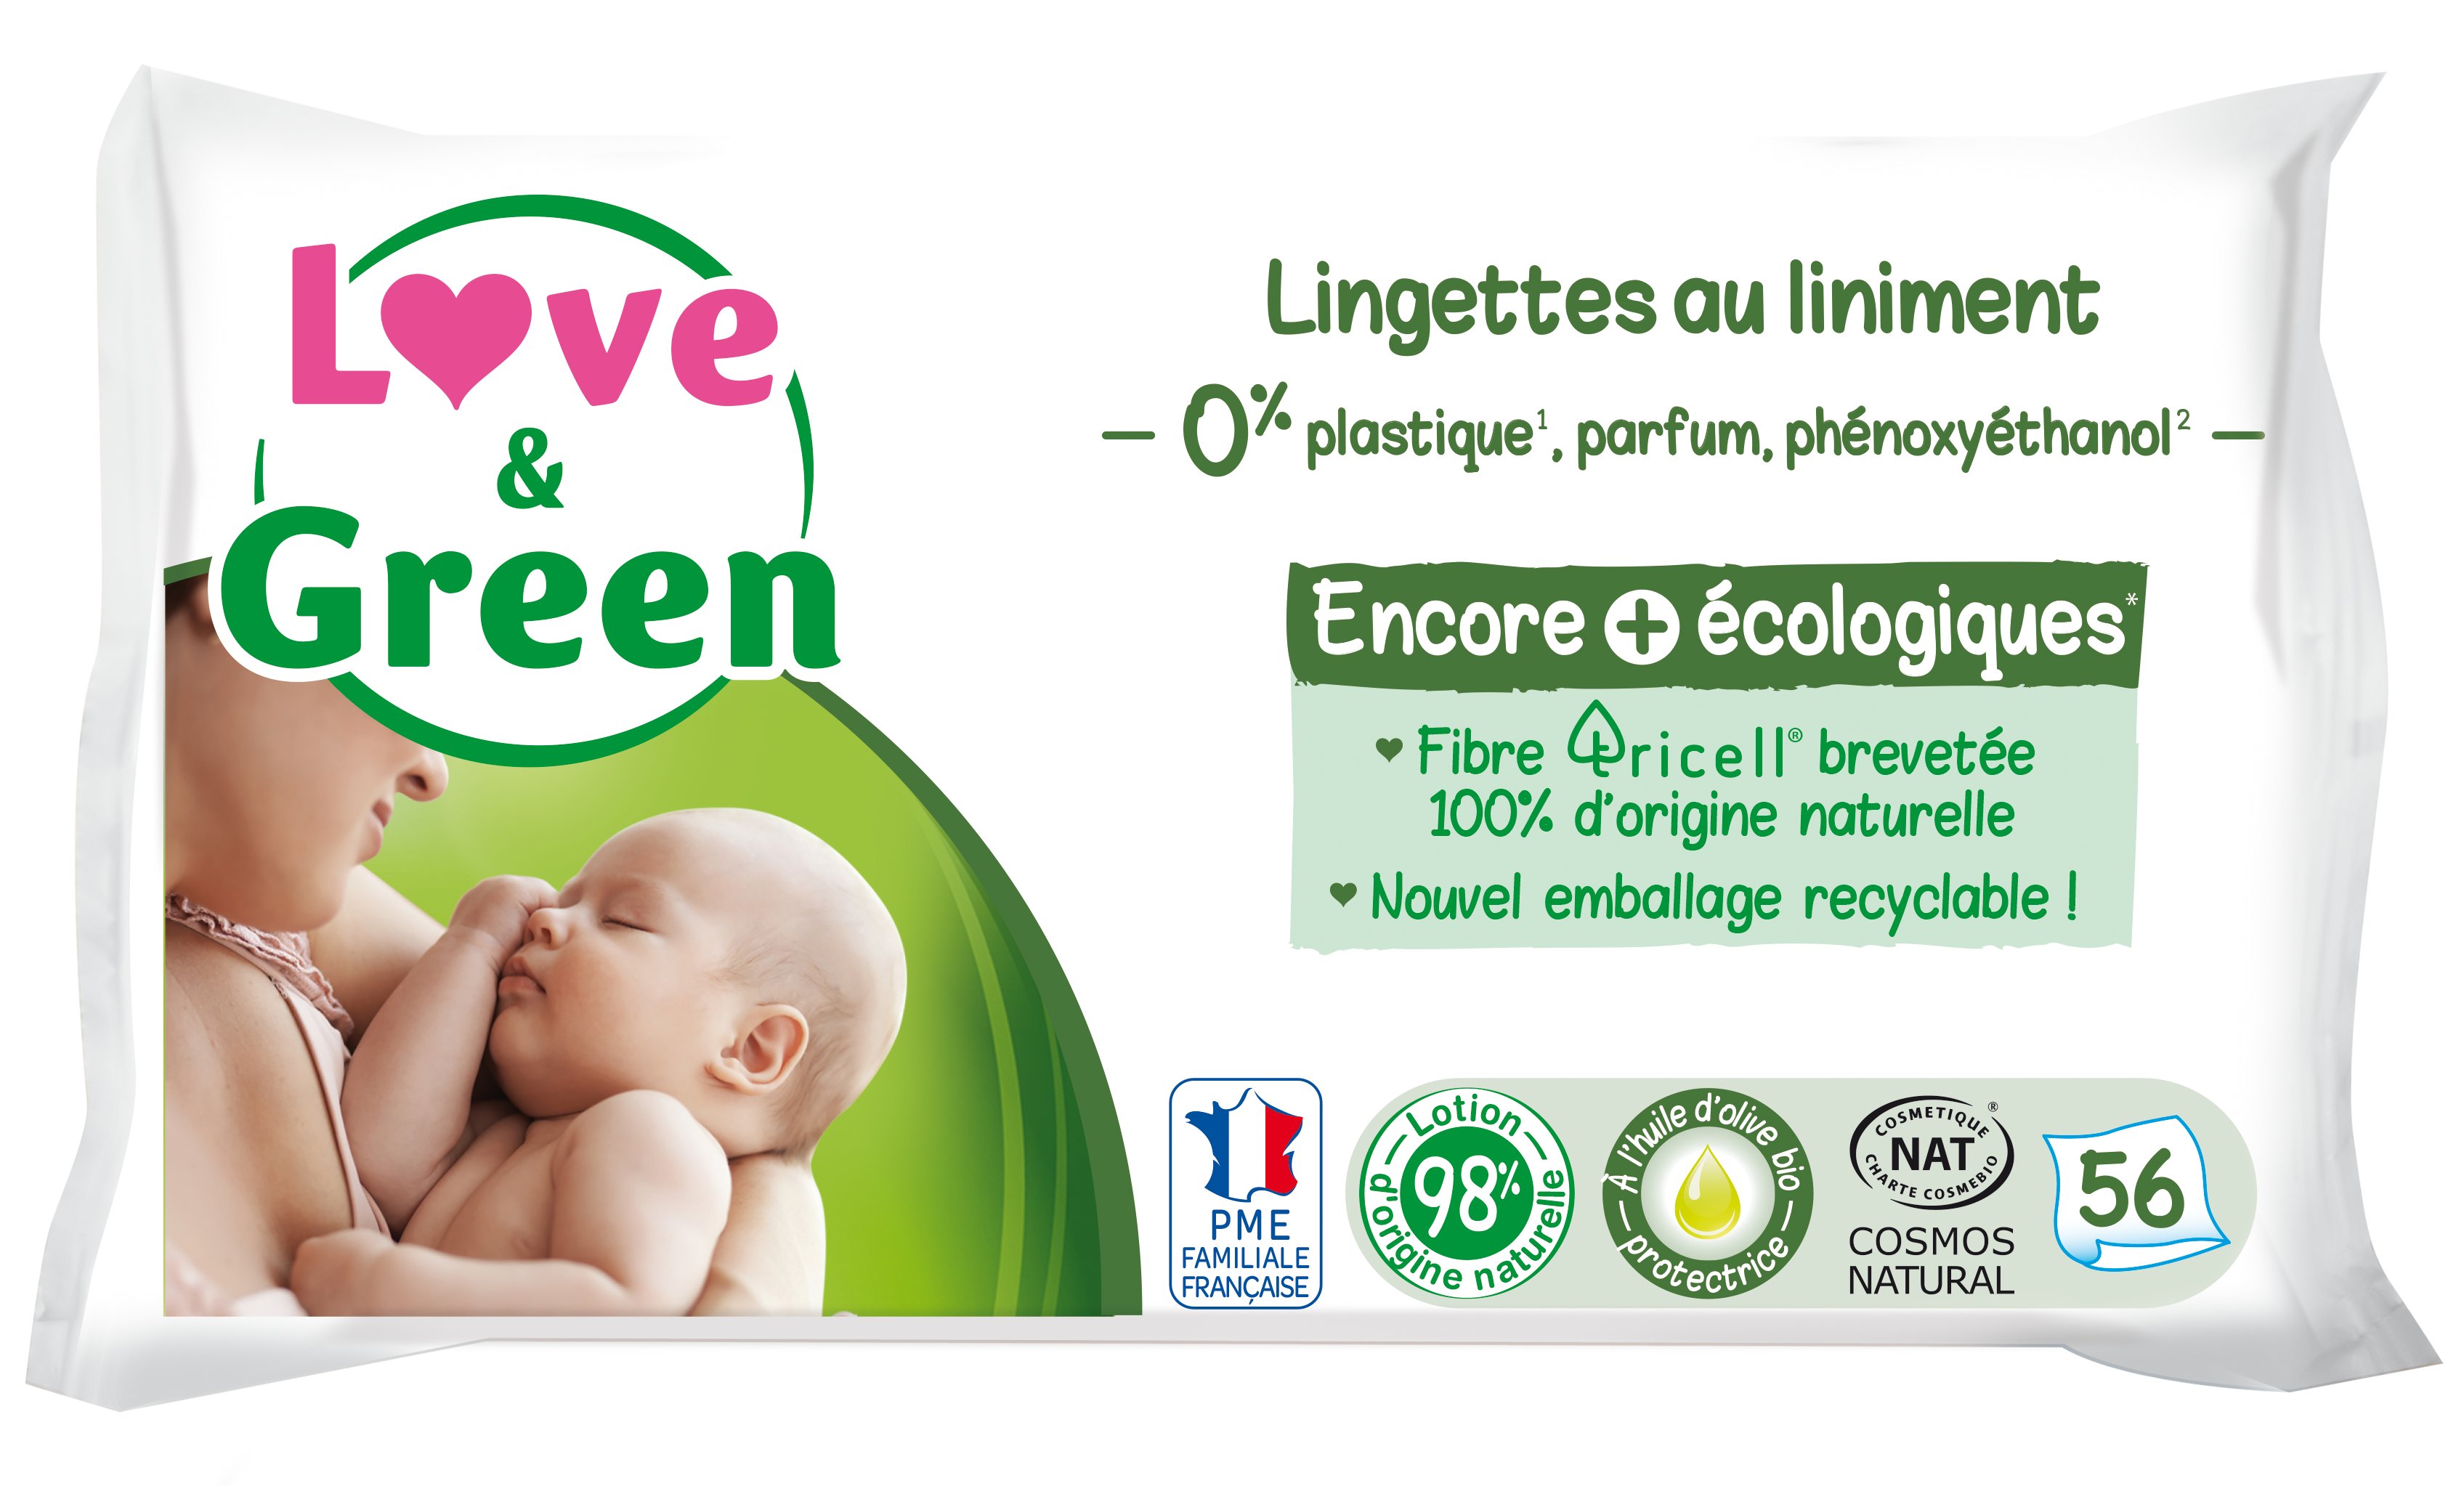 Love and Green  Lingettes au liniment - Dentimed - A Swiss